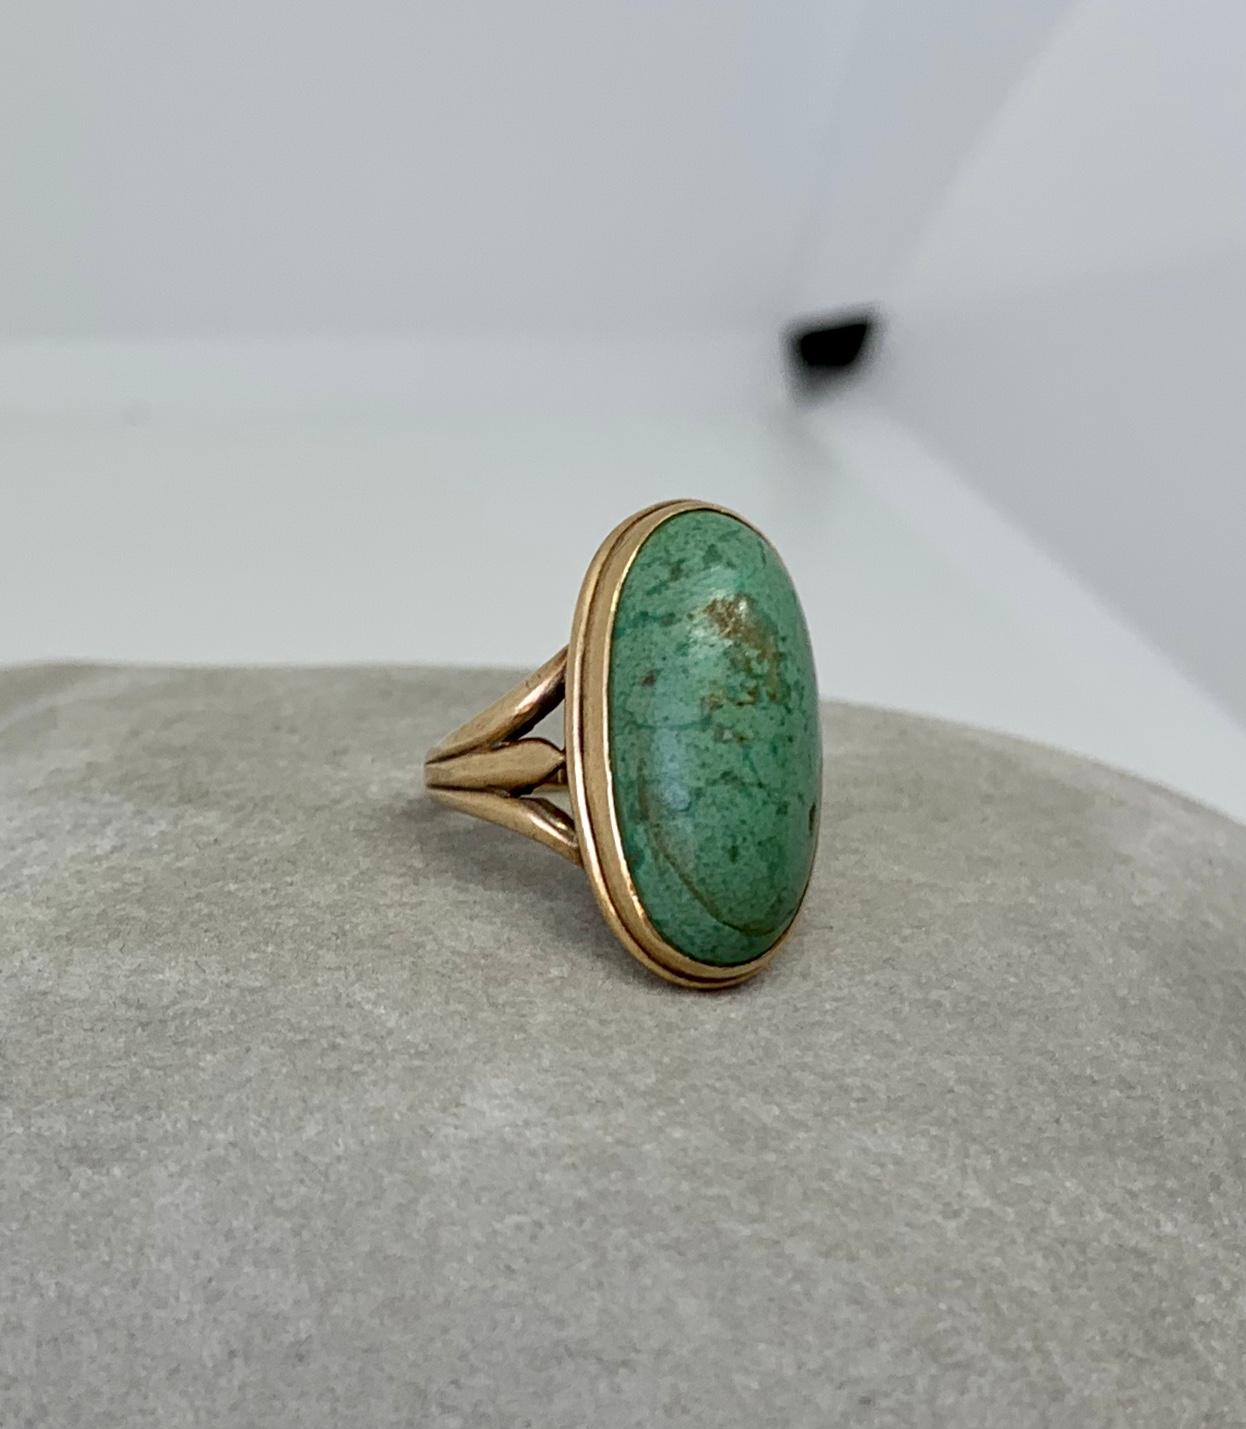 Antique Turquoise Ring Retro Mid Century Cocktail Ring Gold In Good Condition For Sale In New York, NY